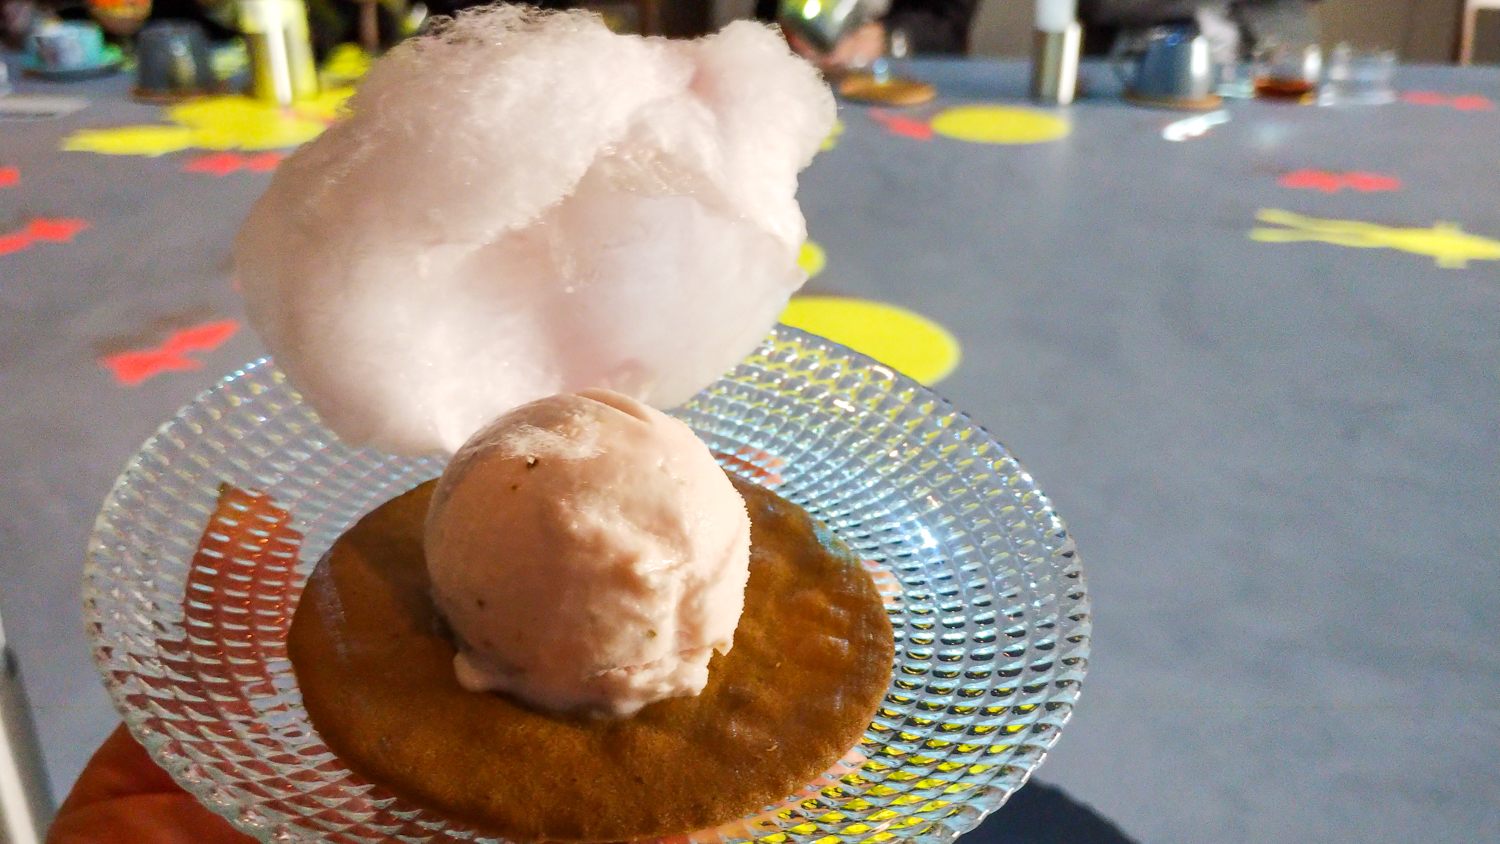 Sakukra flavored ice cream in the cotton candy for "Sakura and strawberry with haselnuts parfait"